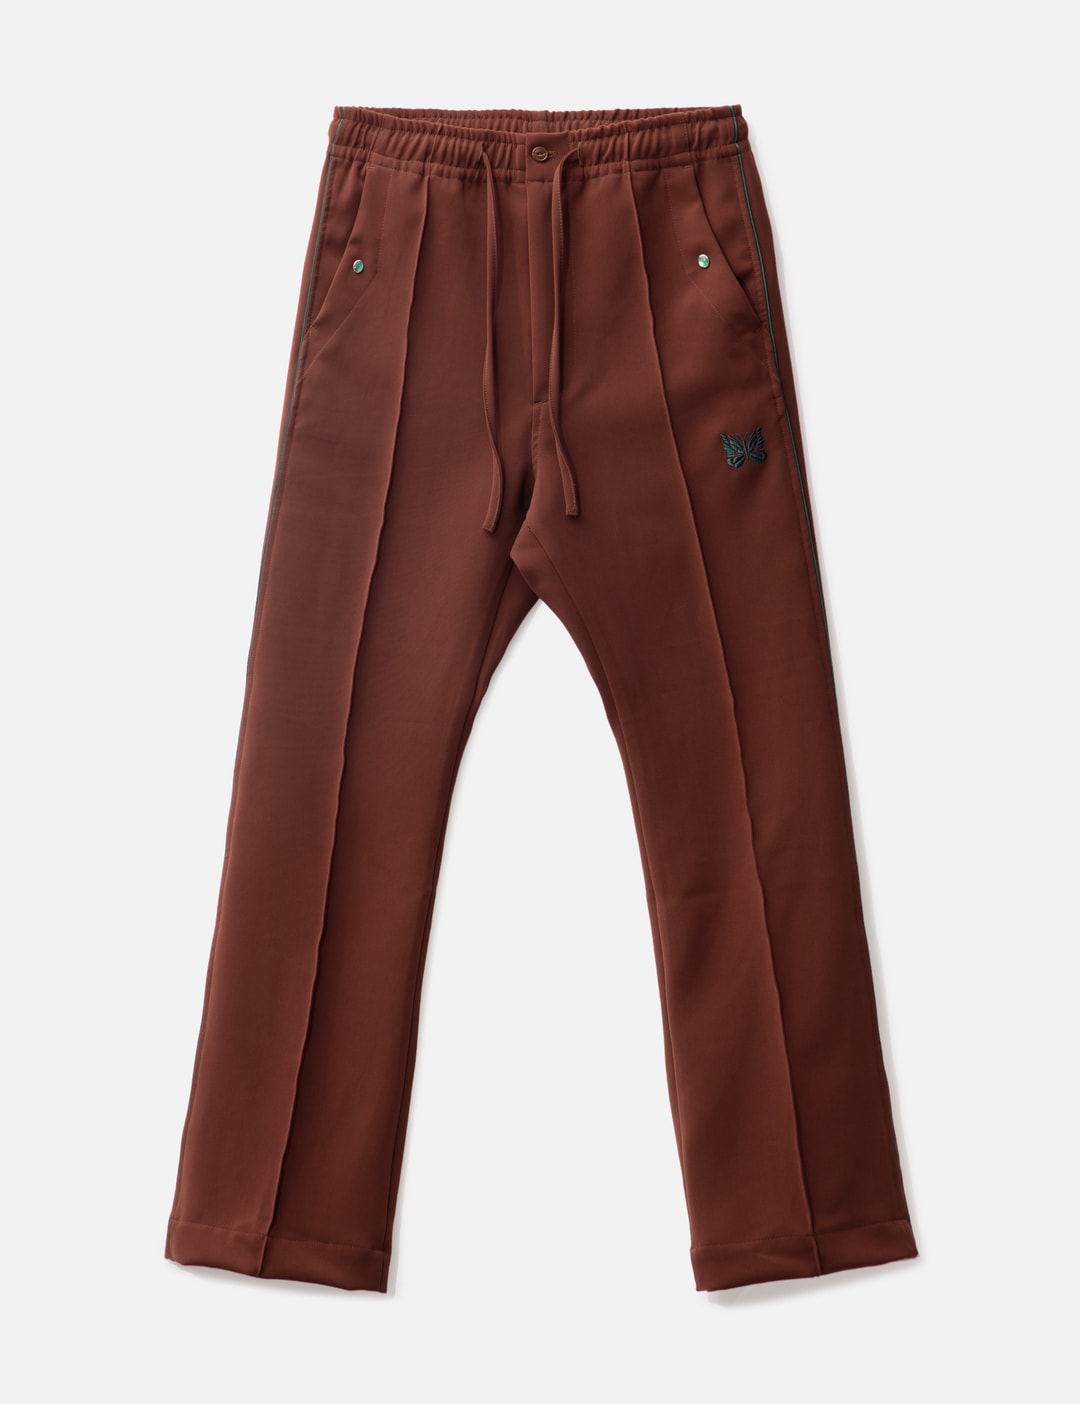 Needles - Narrow Track Pants  HBX - Globally Curated Fashion and Lifestyle  by Hypebeast